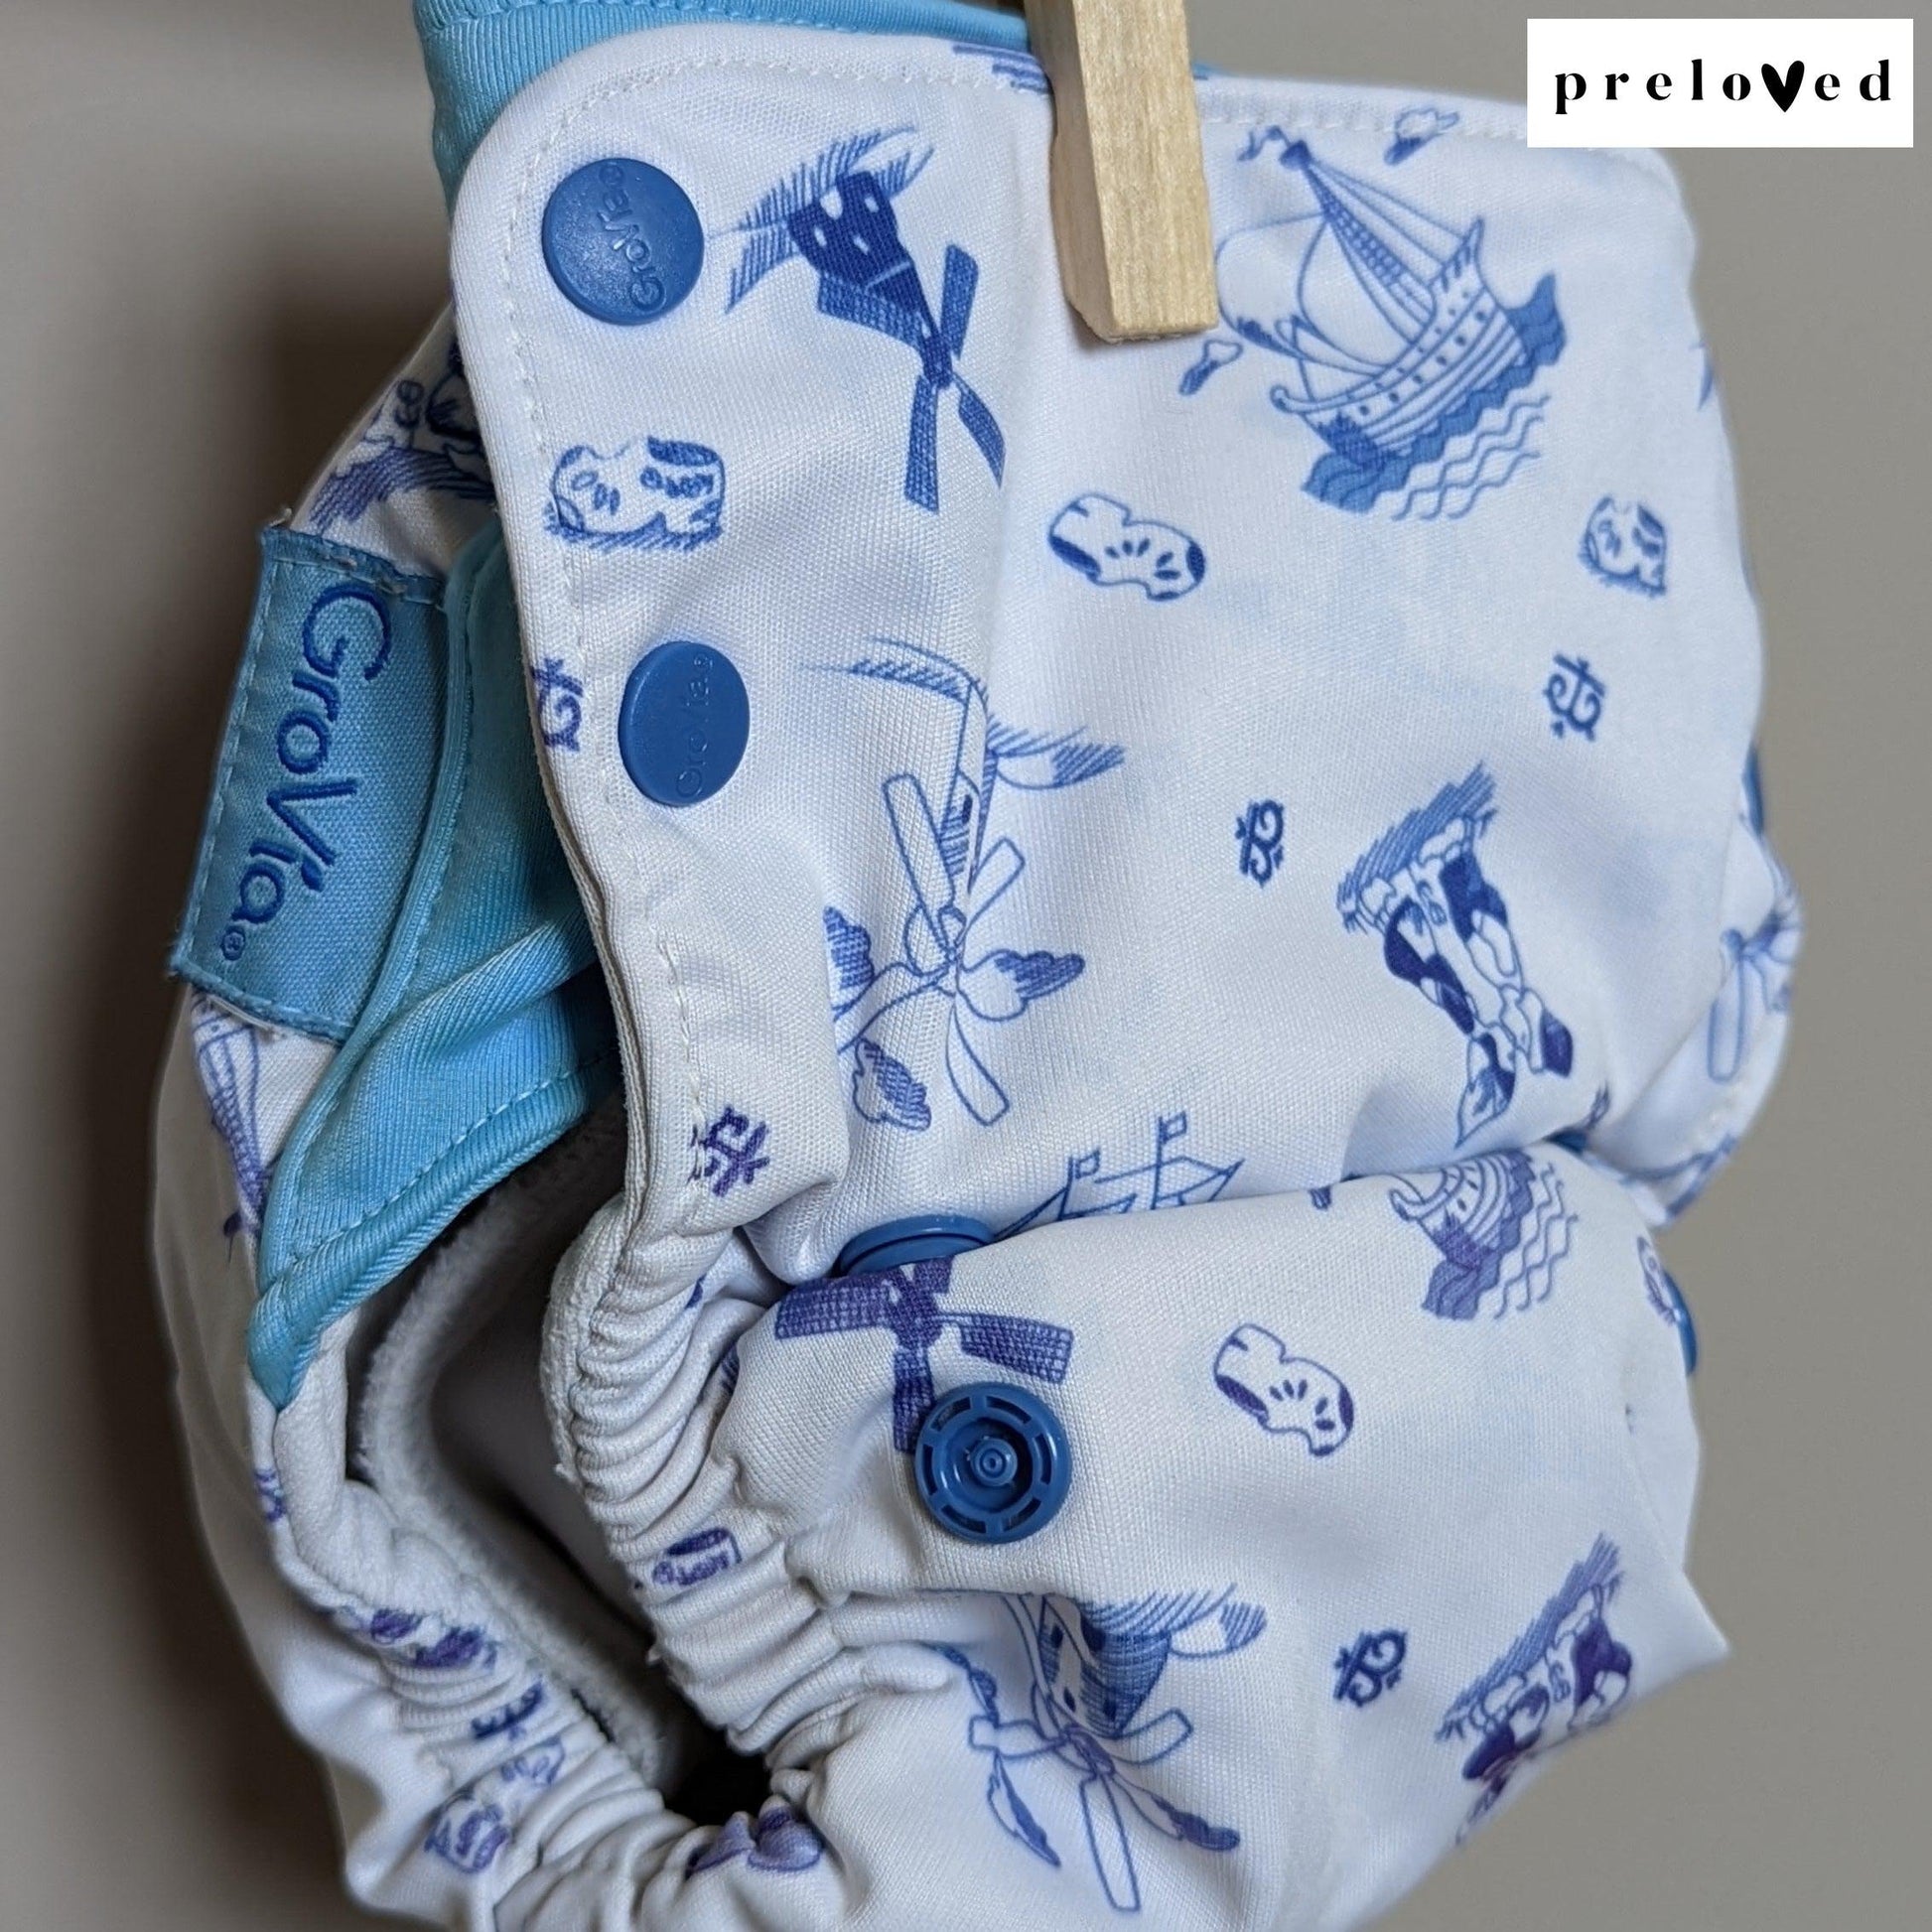 Grovia Hybrid All in One-All In One Nappy-Grovia-Holland-The Nappy Market